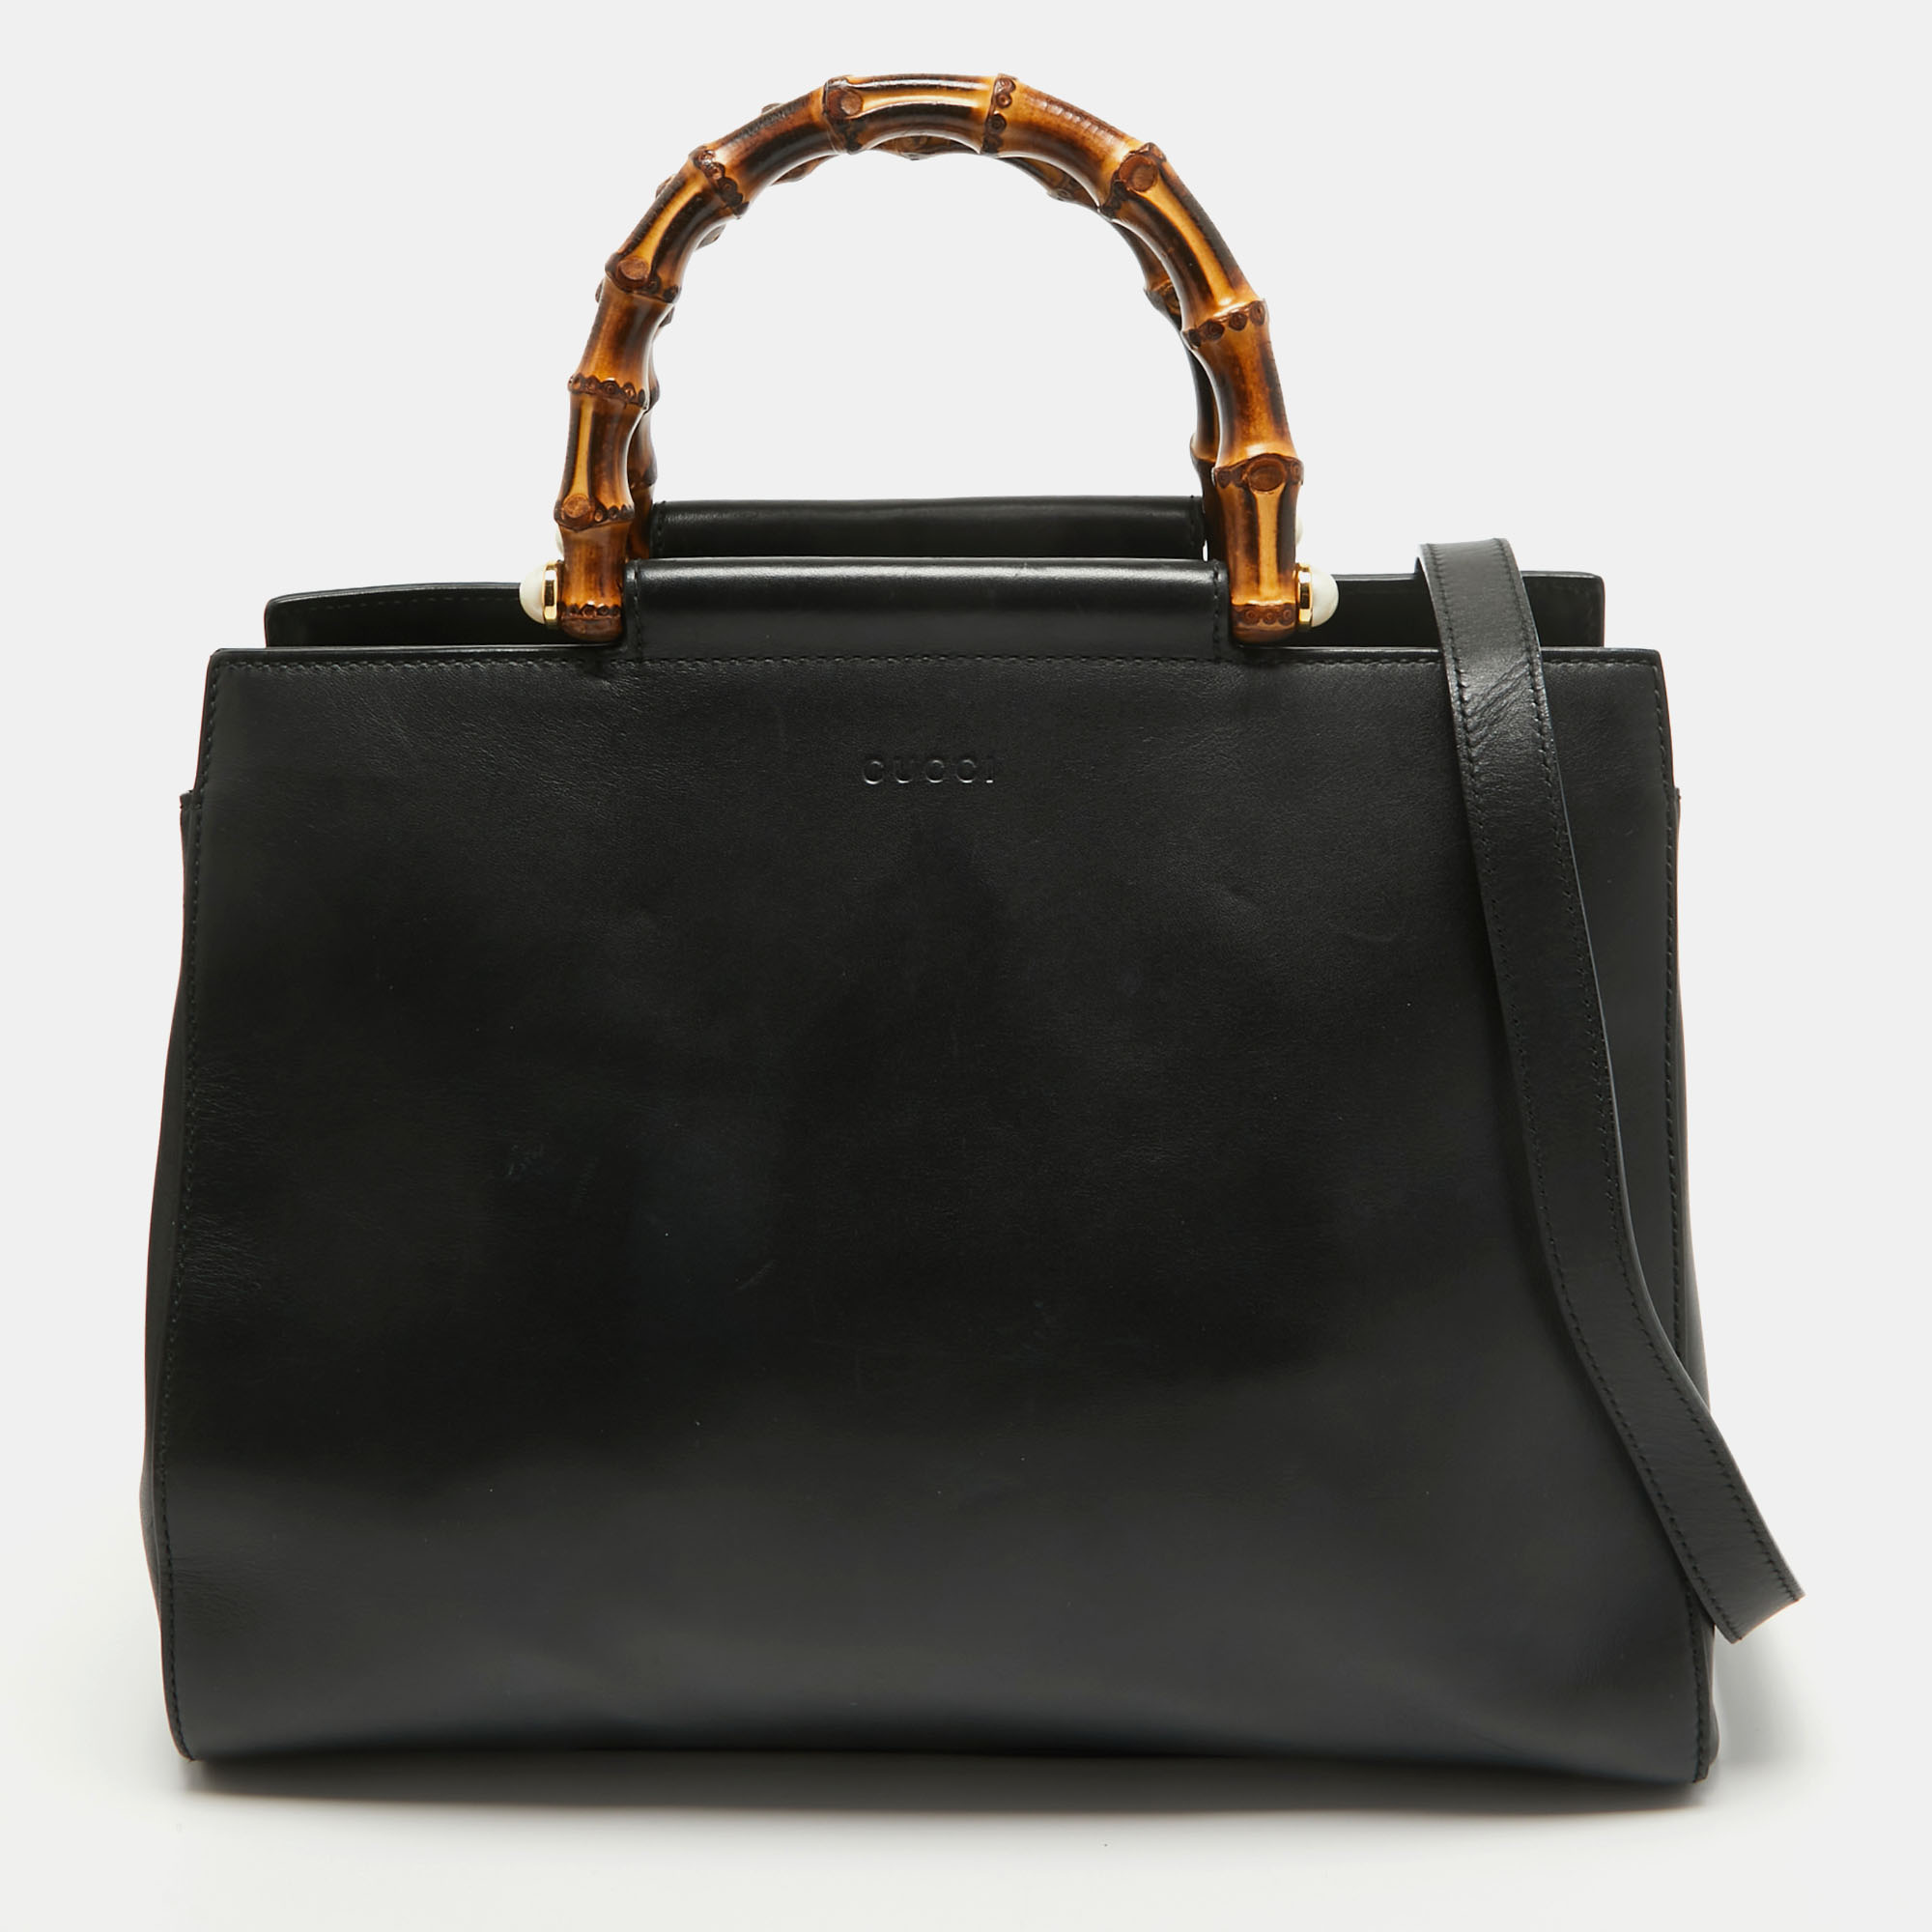 Pre-owned Gucci Black Leather Bamboo Nymphaea Tote